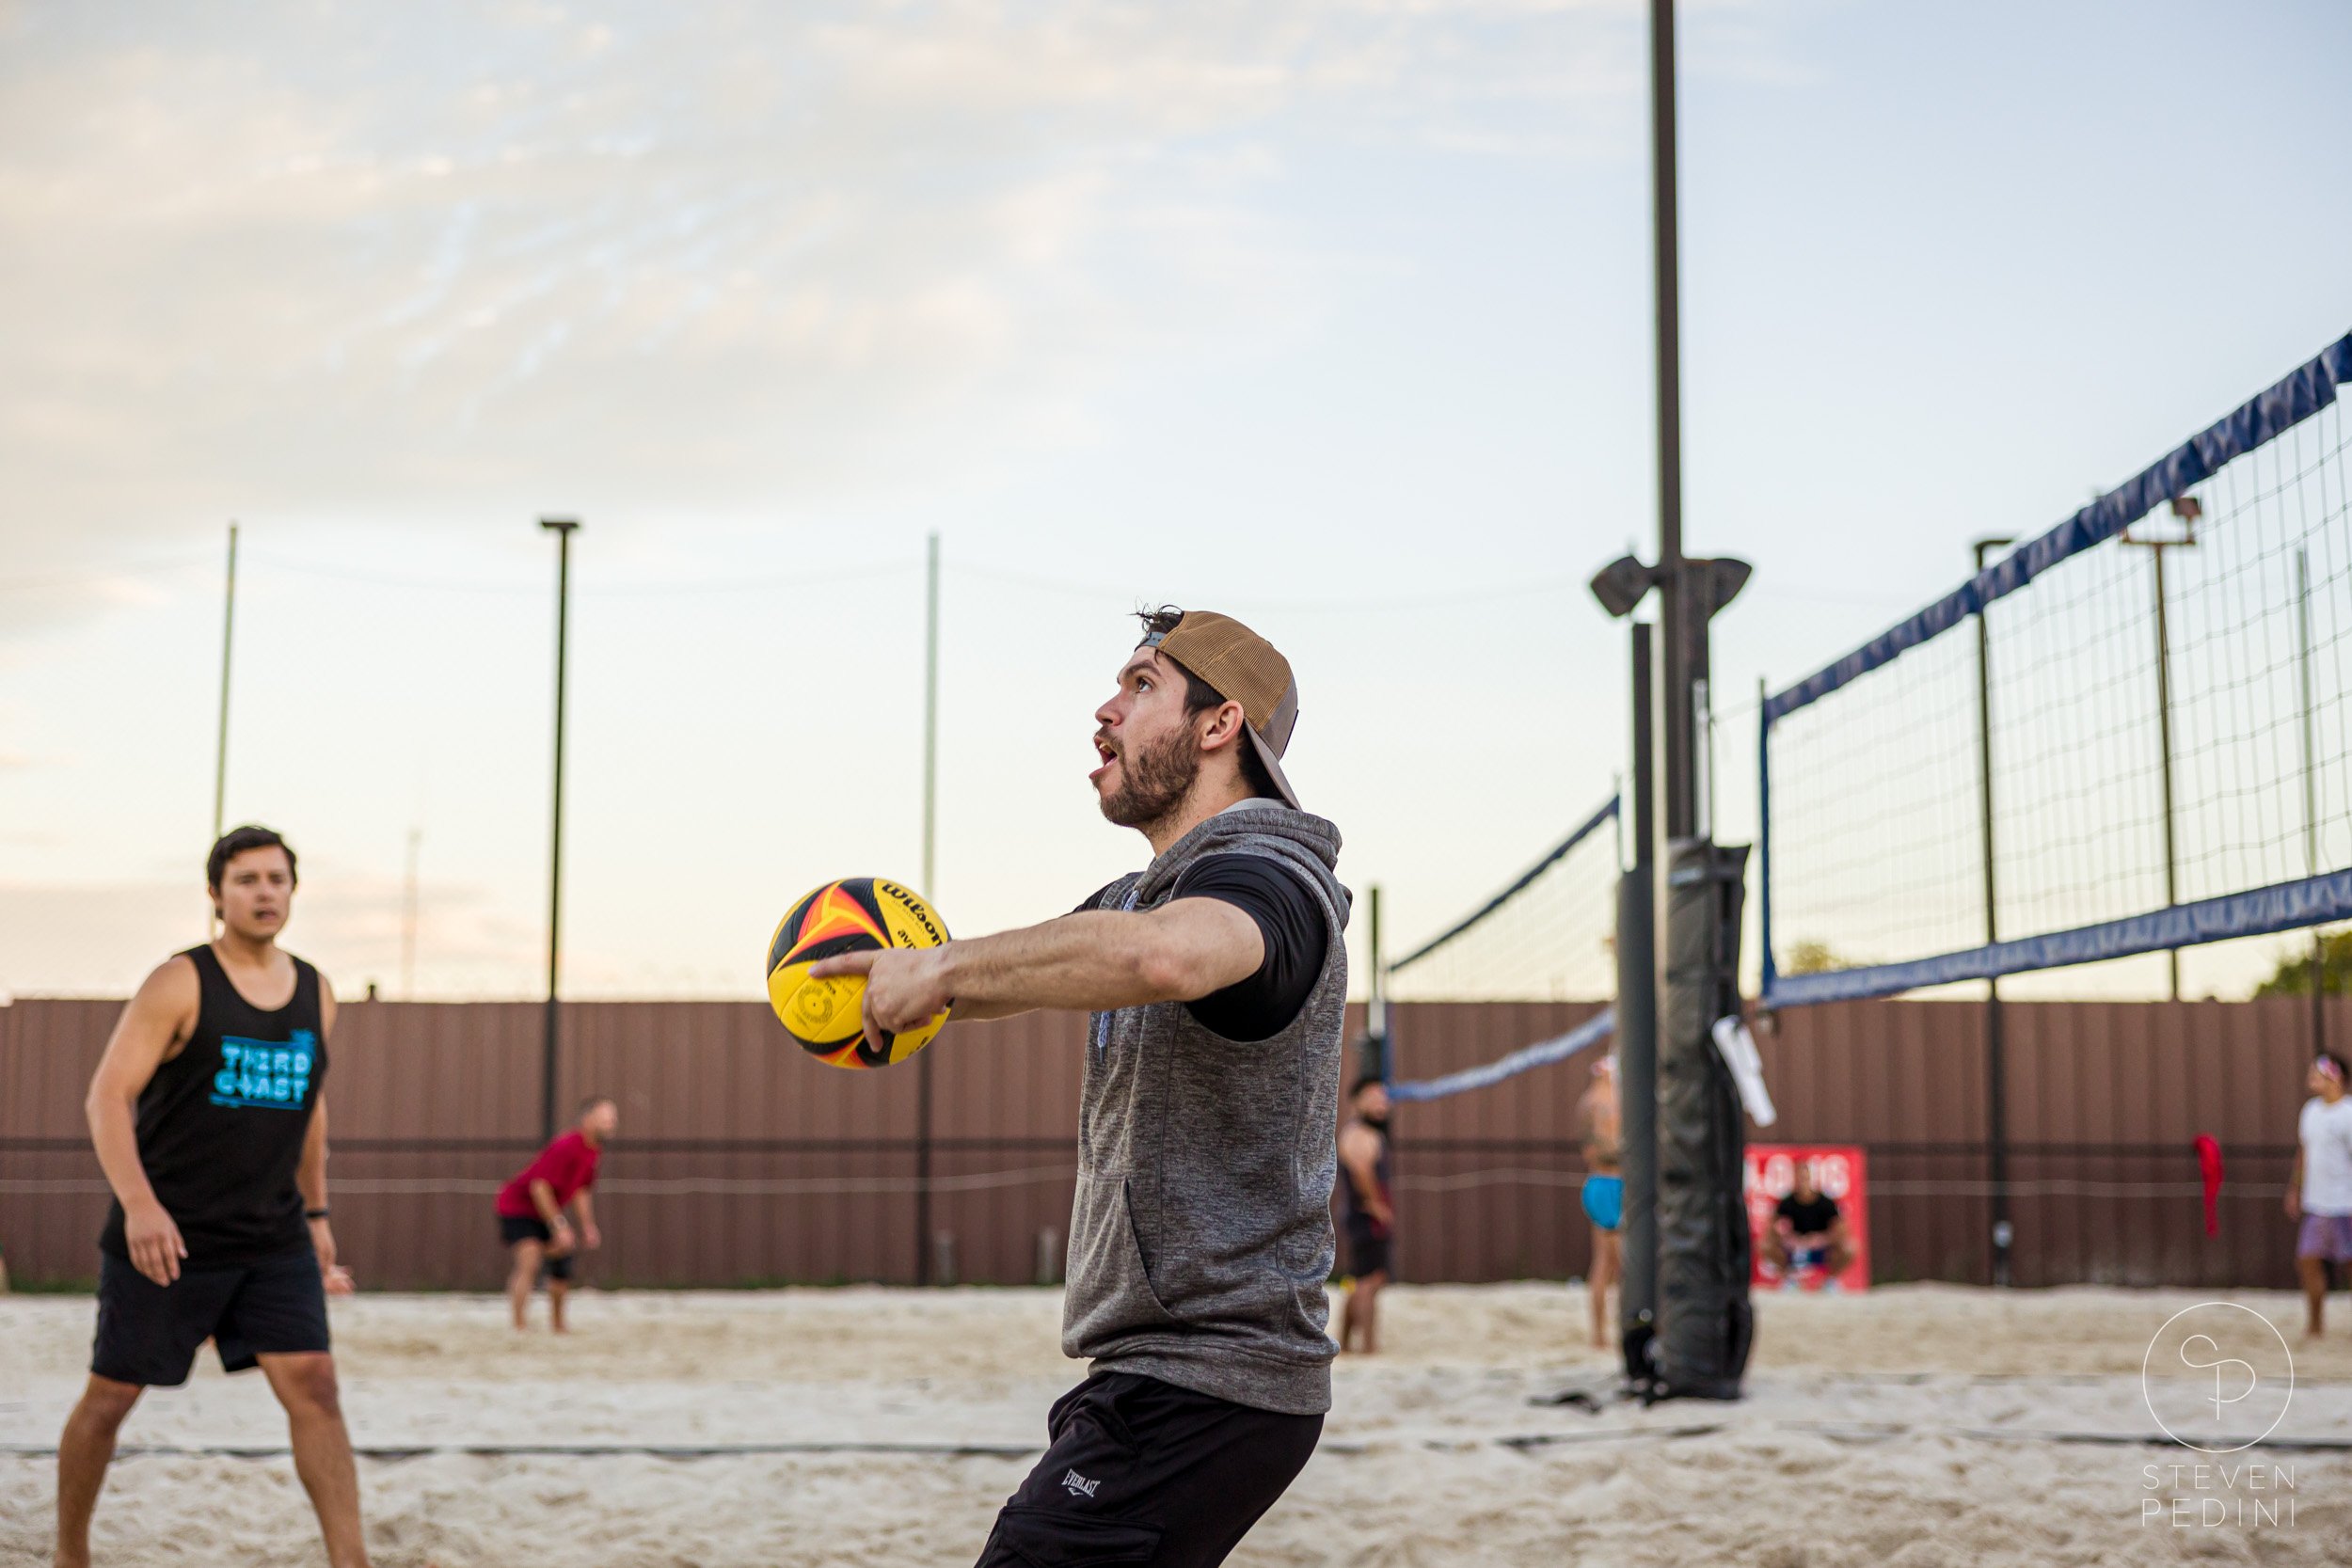 Steven Pedini Photography - Bumpy Pickle - Sand Volleyball - Houston TX - World Cup of Volleyball - 00226.jpg